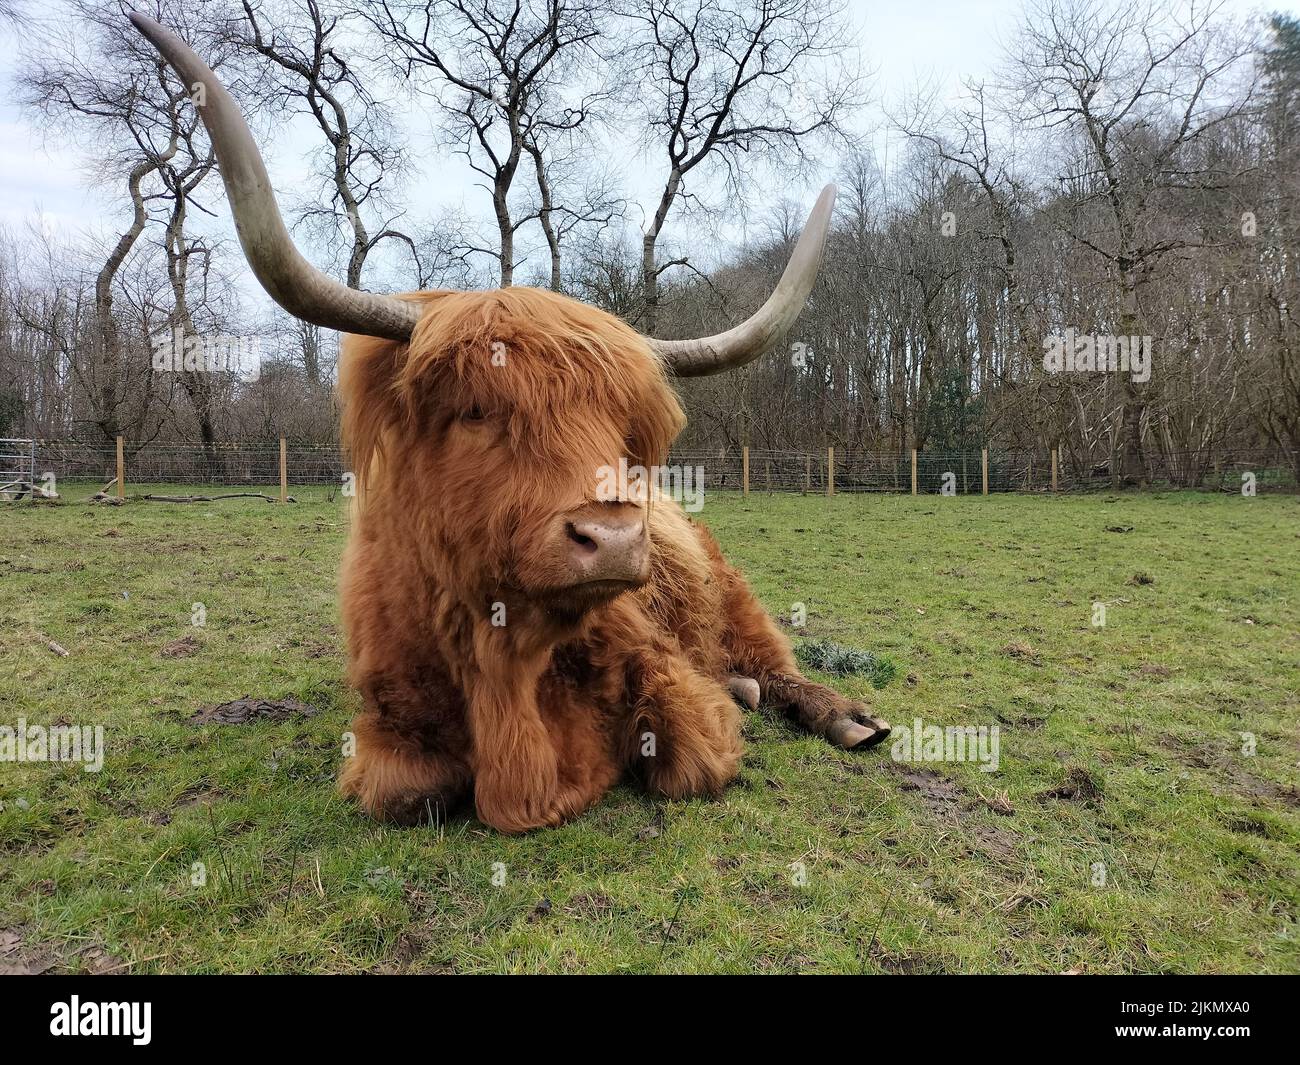 A closeup of a Scottish Highland Cow laying on the grass Stock Photo